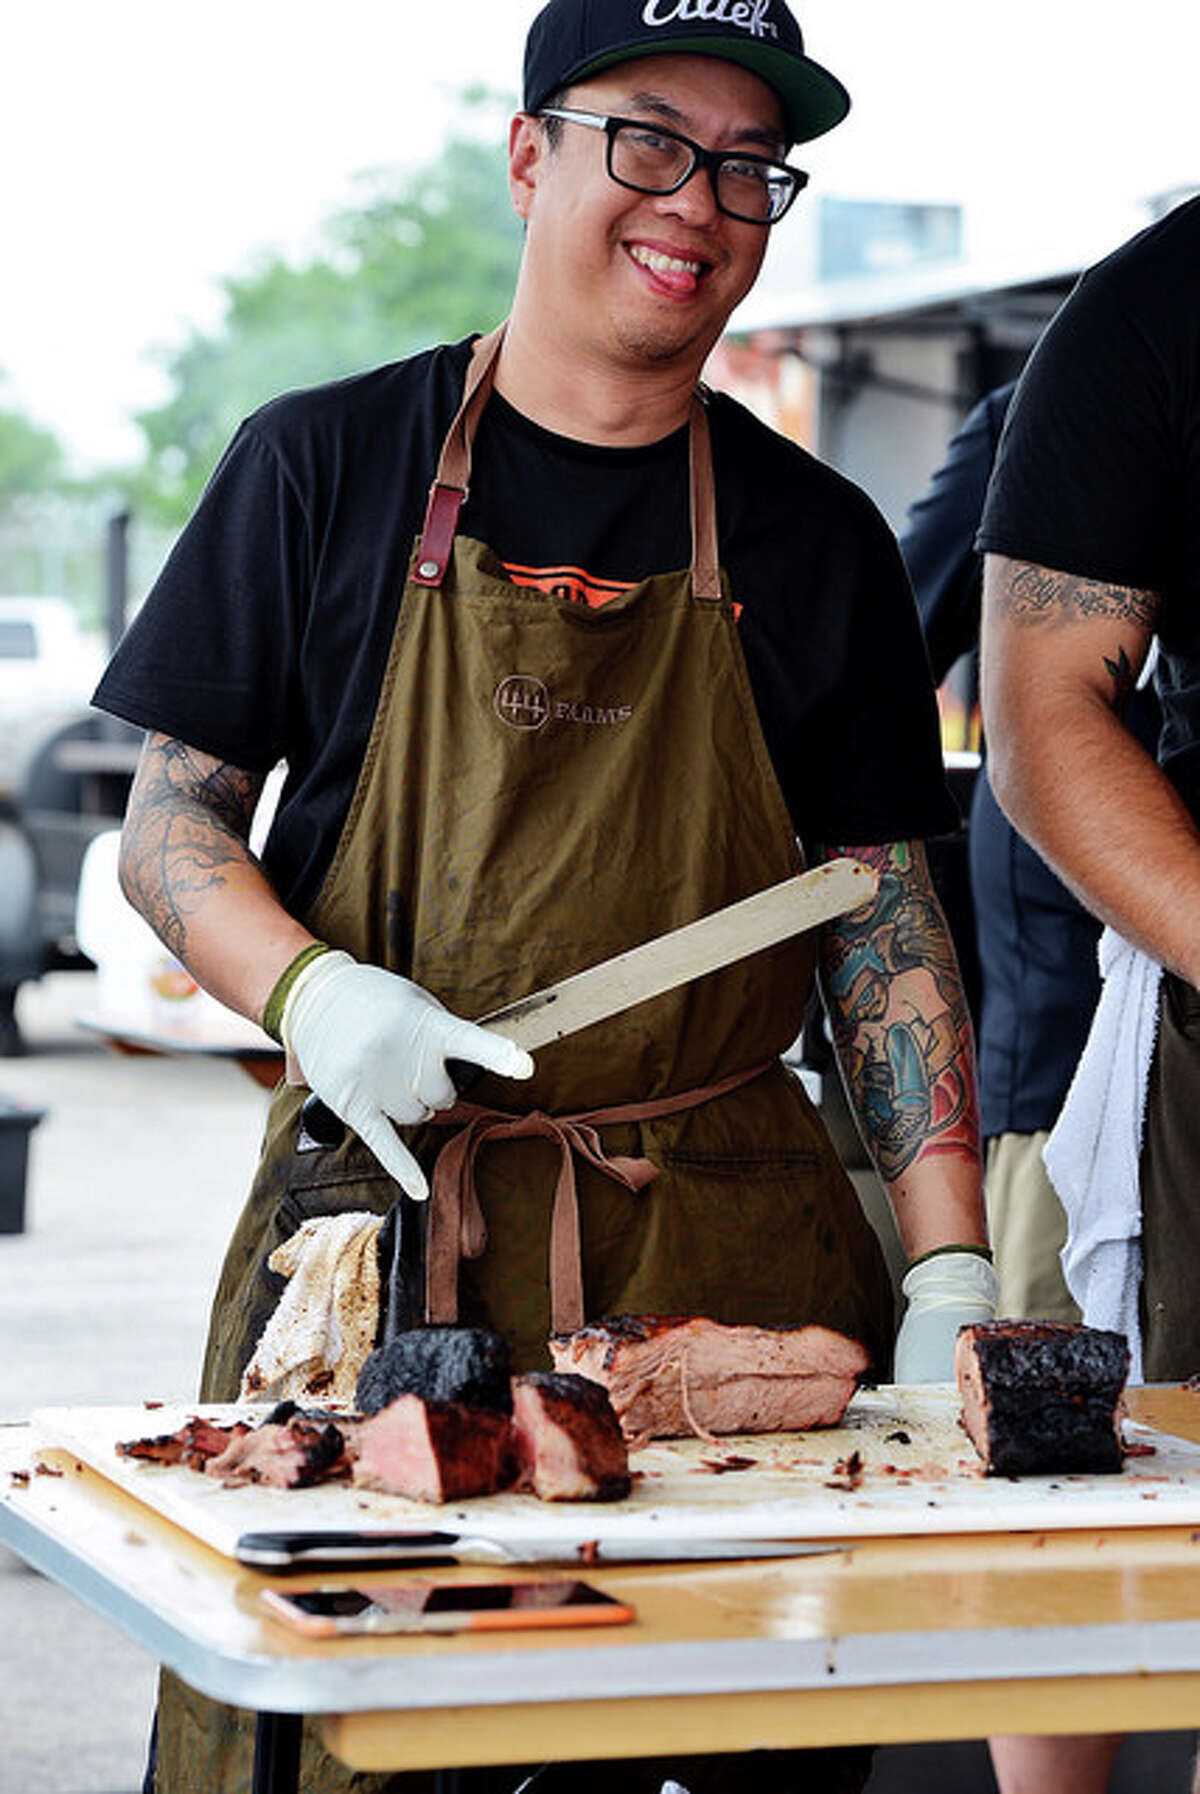 Quy Haong of Blood Bros. BBQ at the Houston Barbecue Festival.